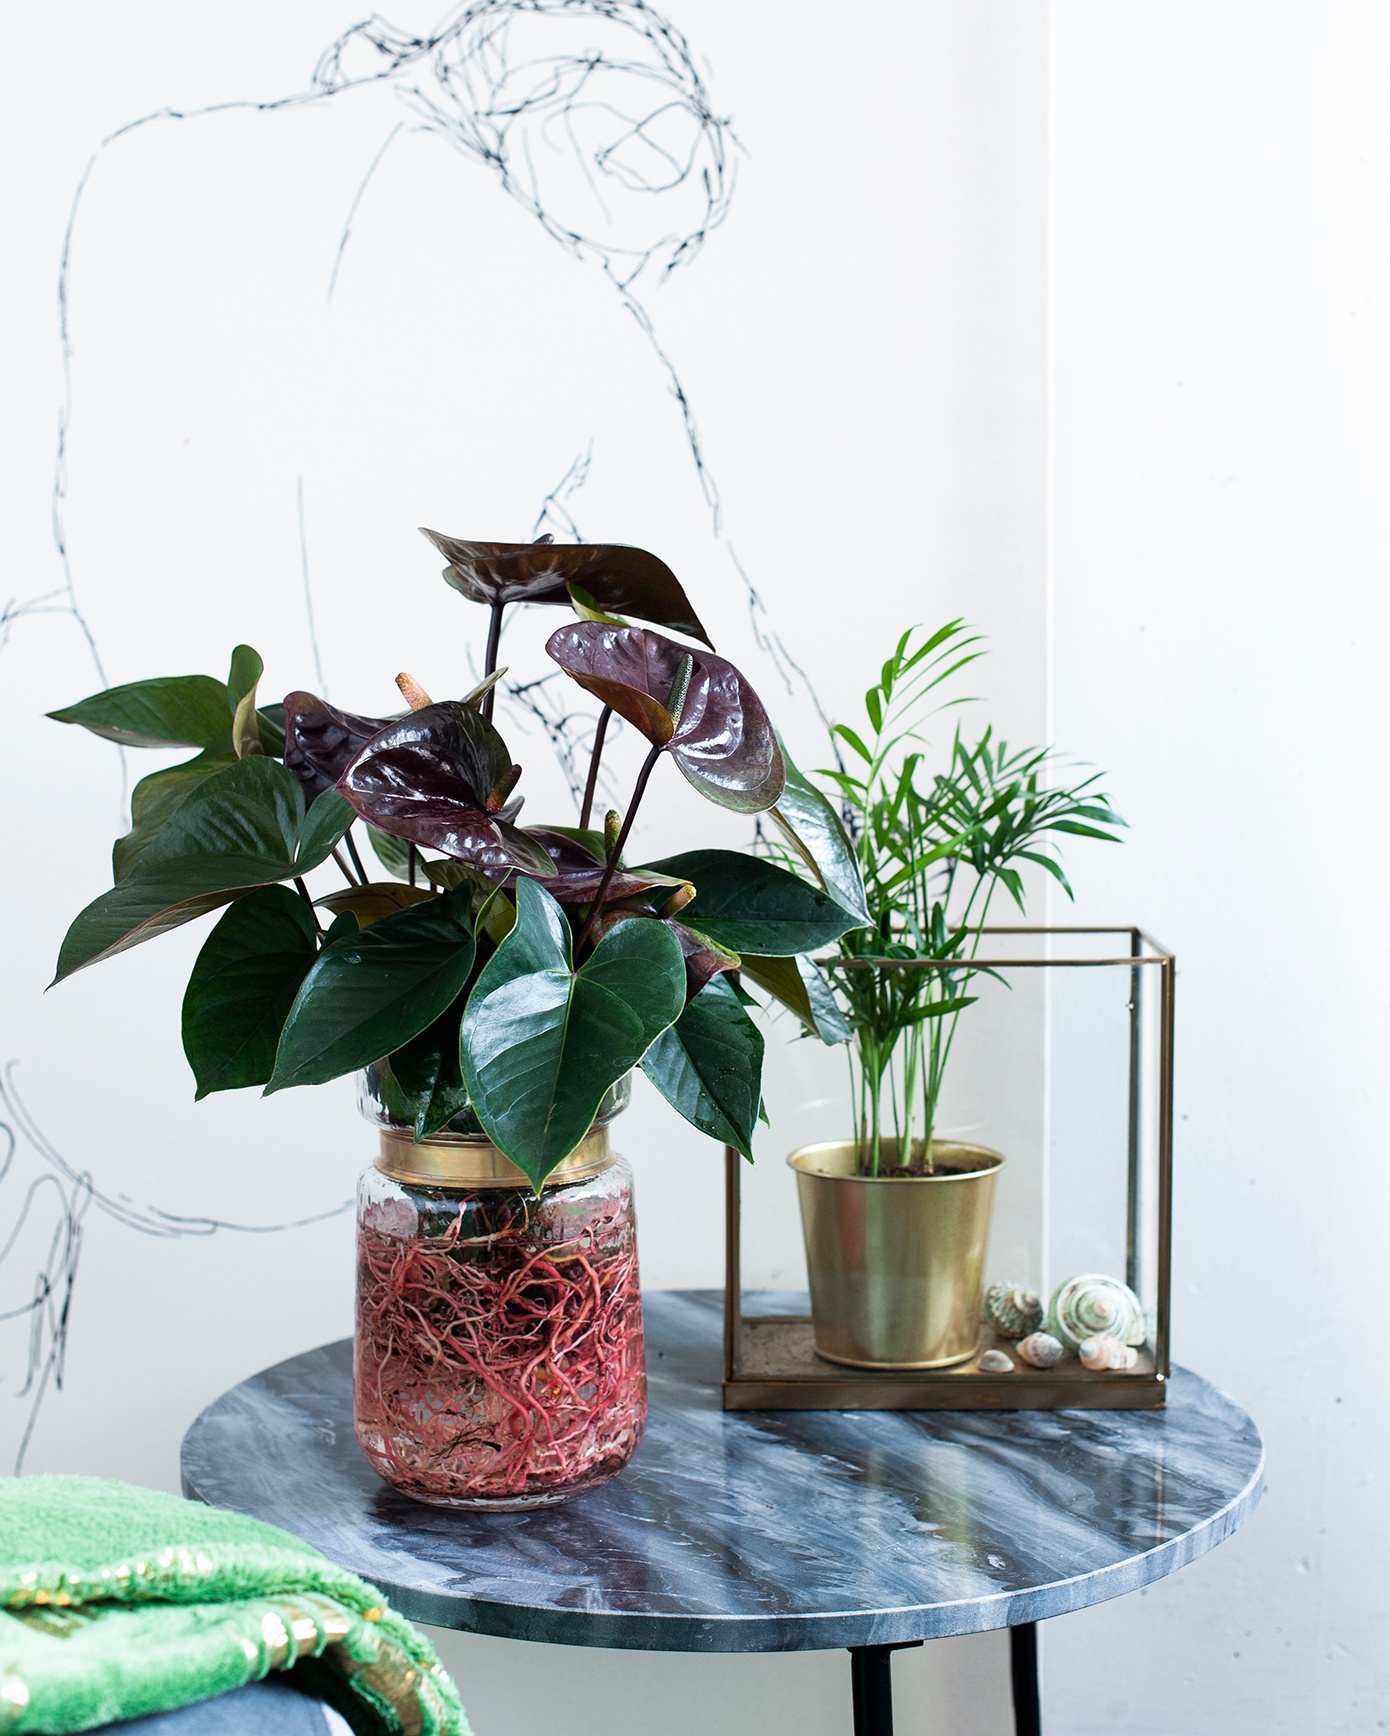 4 DIY ideas for Mother's Day that use Anthurium flowers and plants